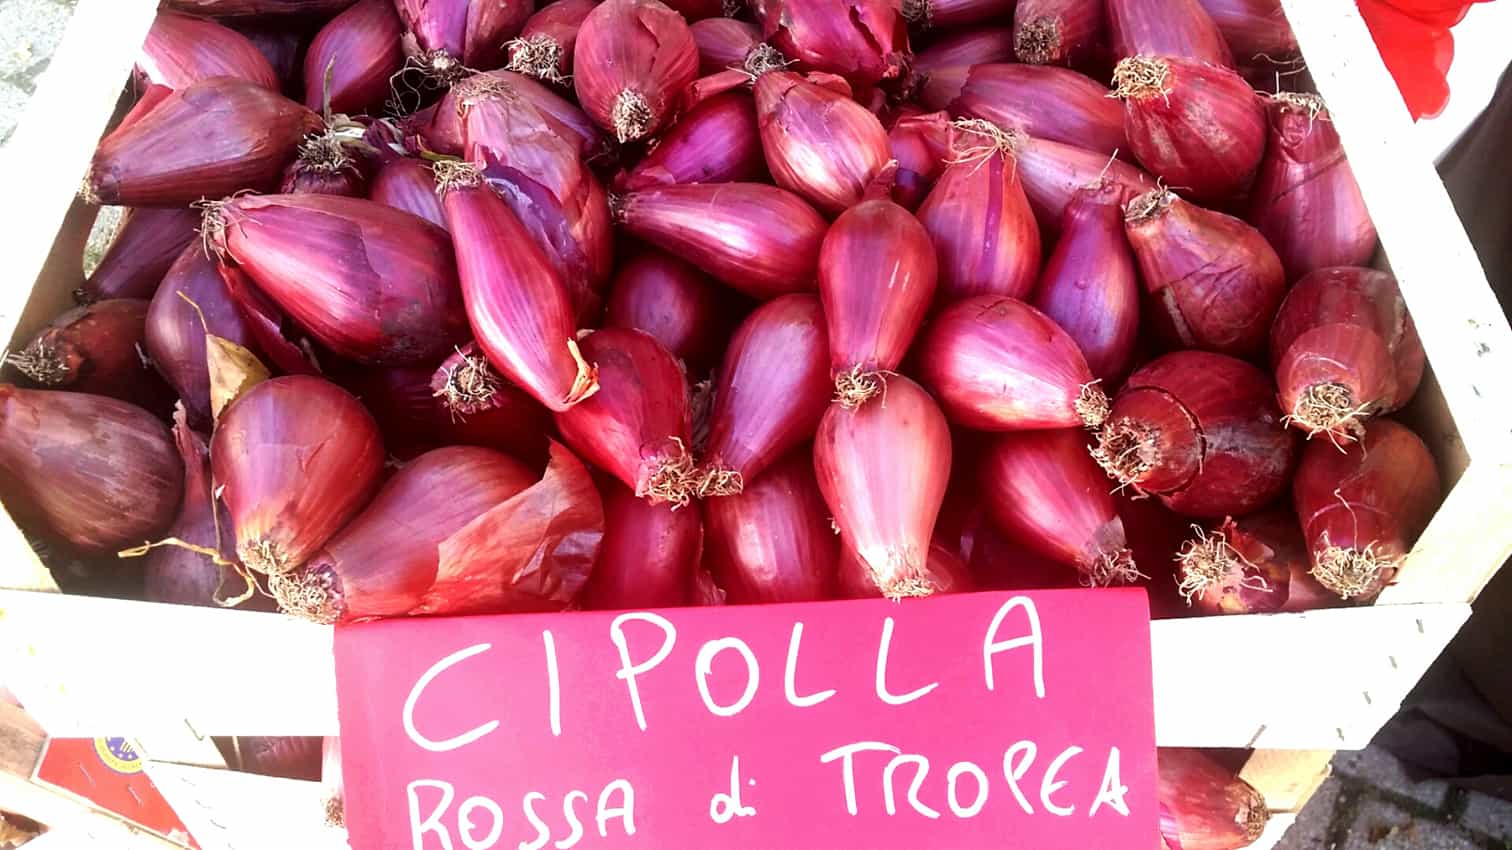 a bag full of tropea red onions, local product of Calabria